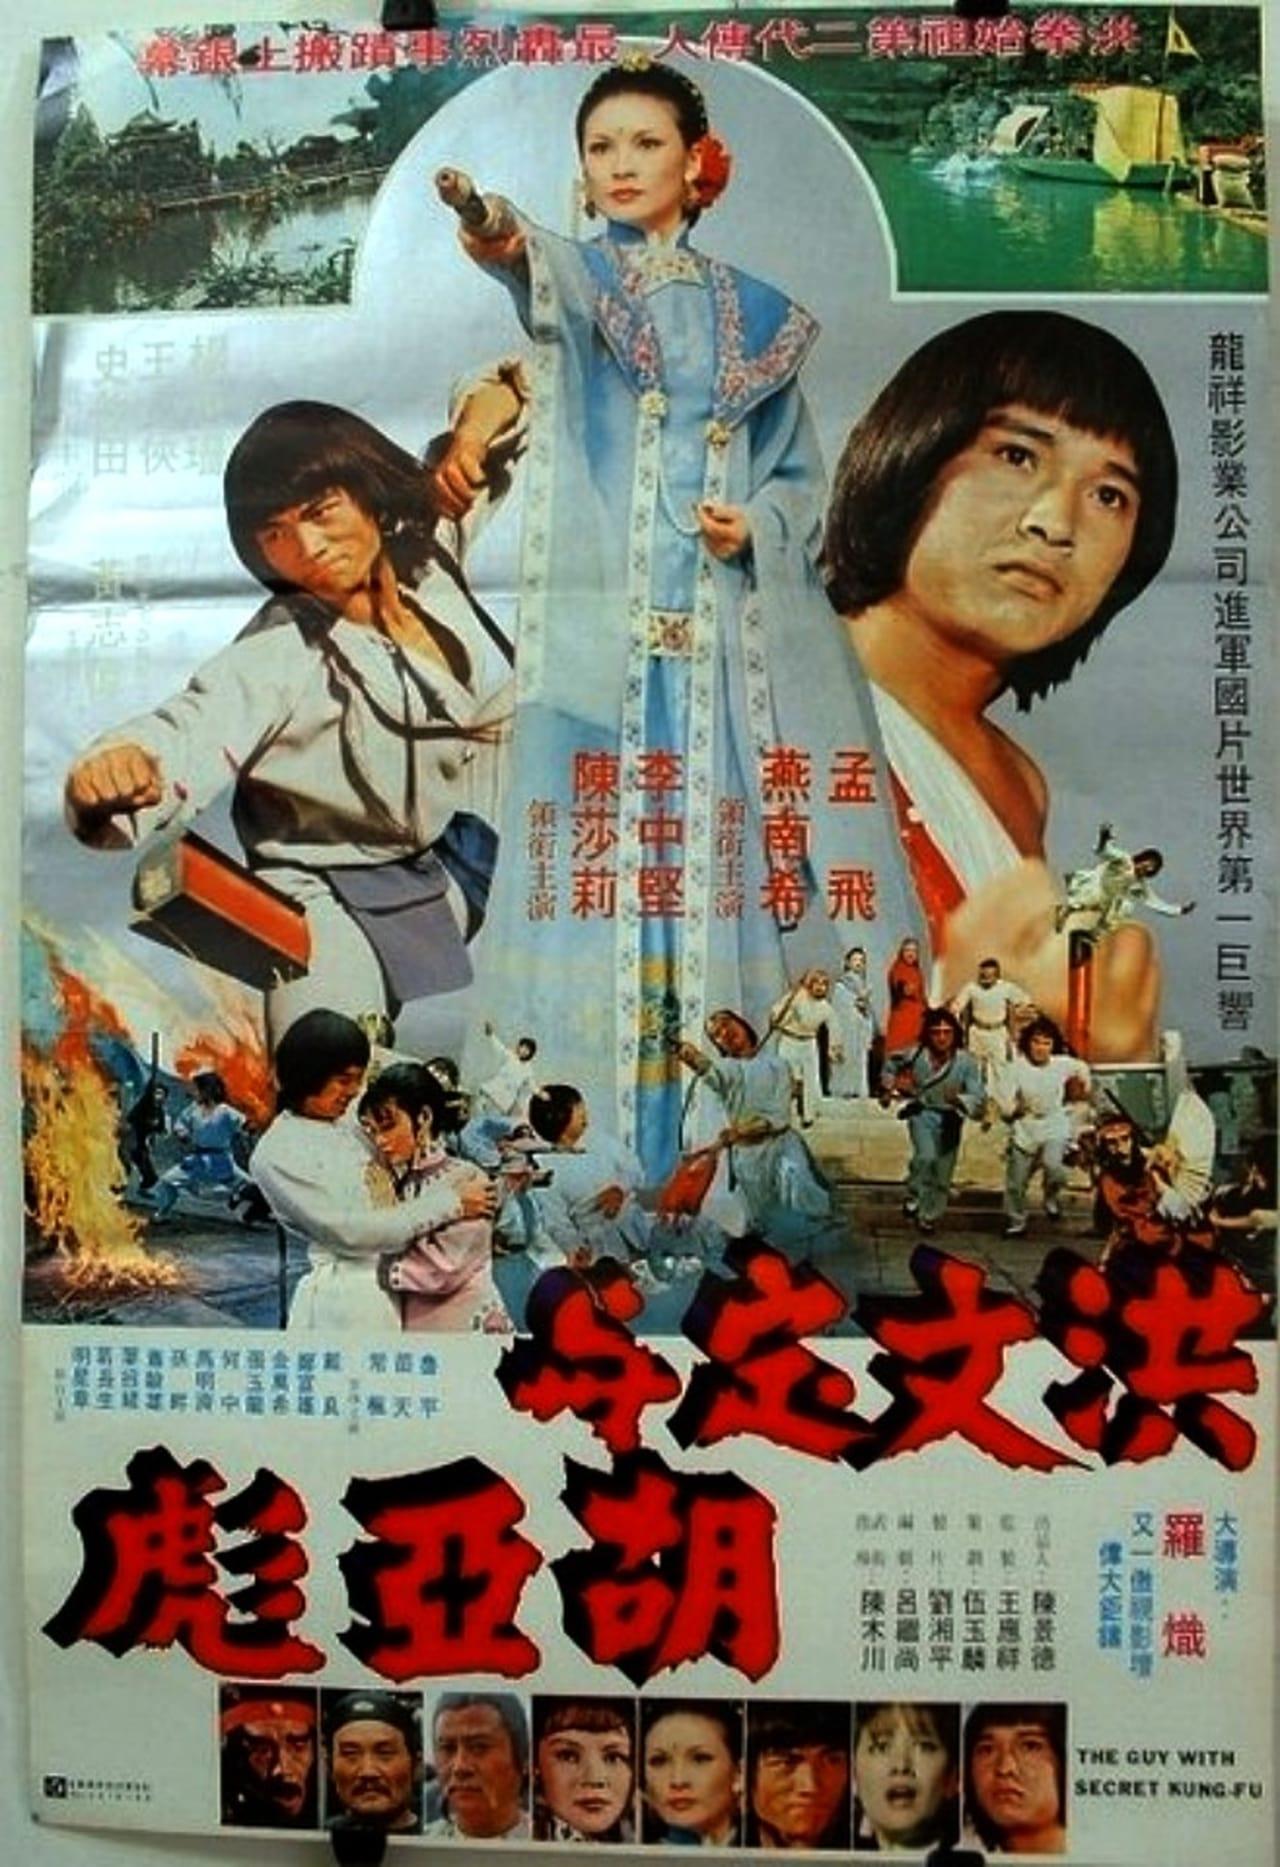 The Guy with the Secret Kung Fu poster